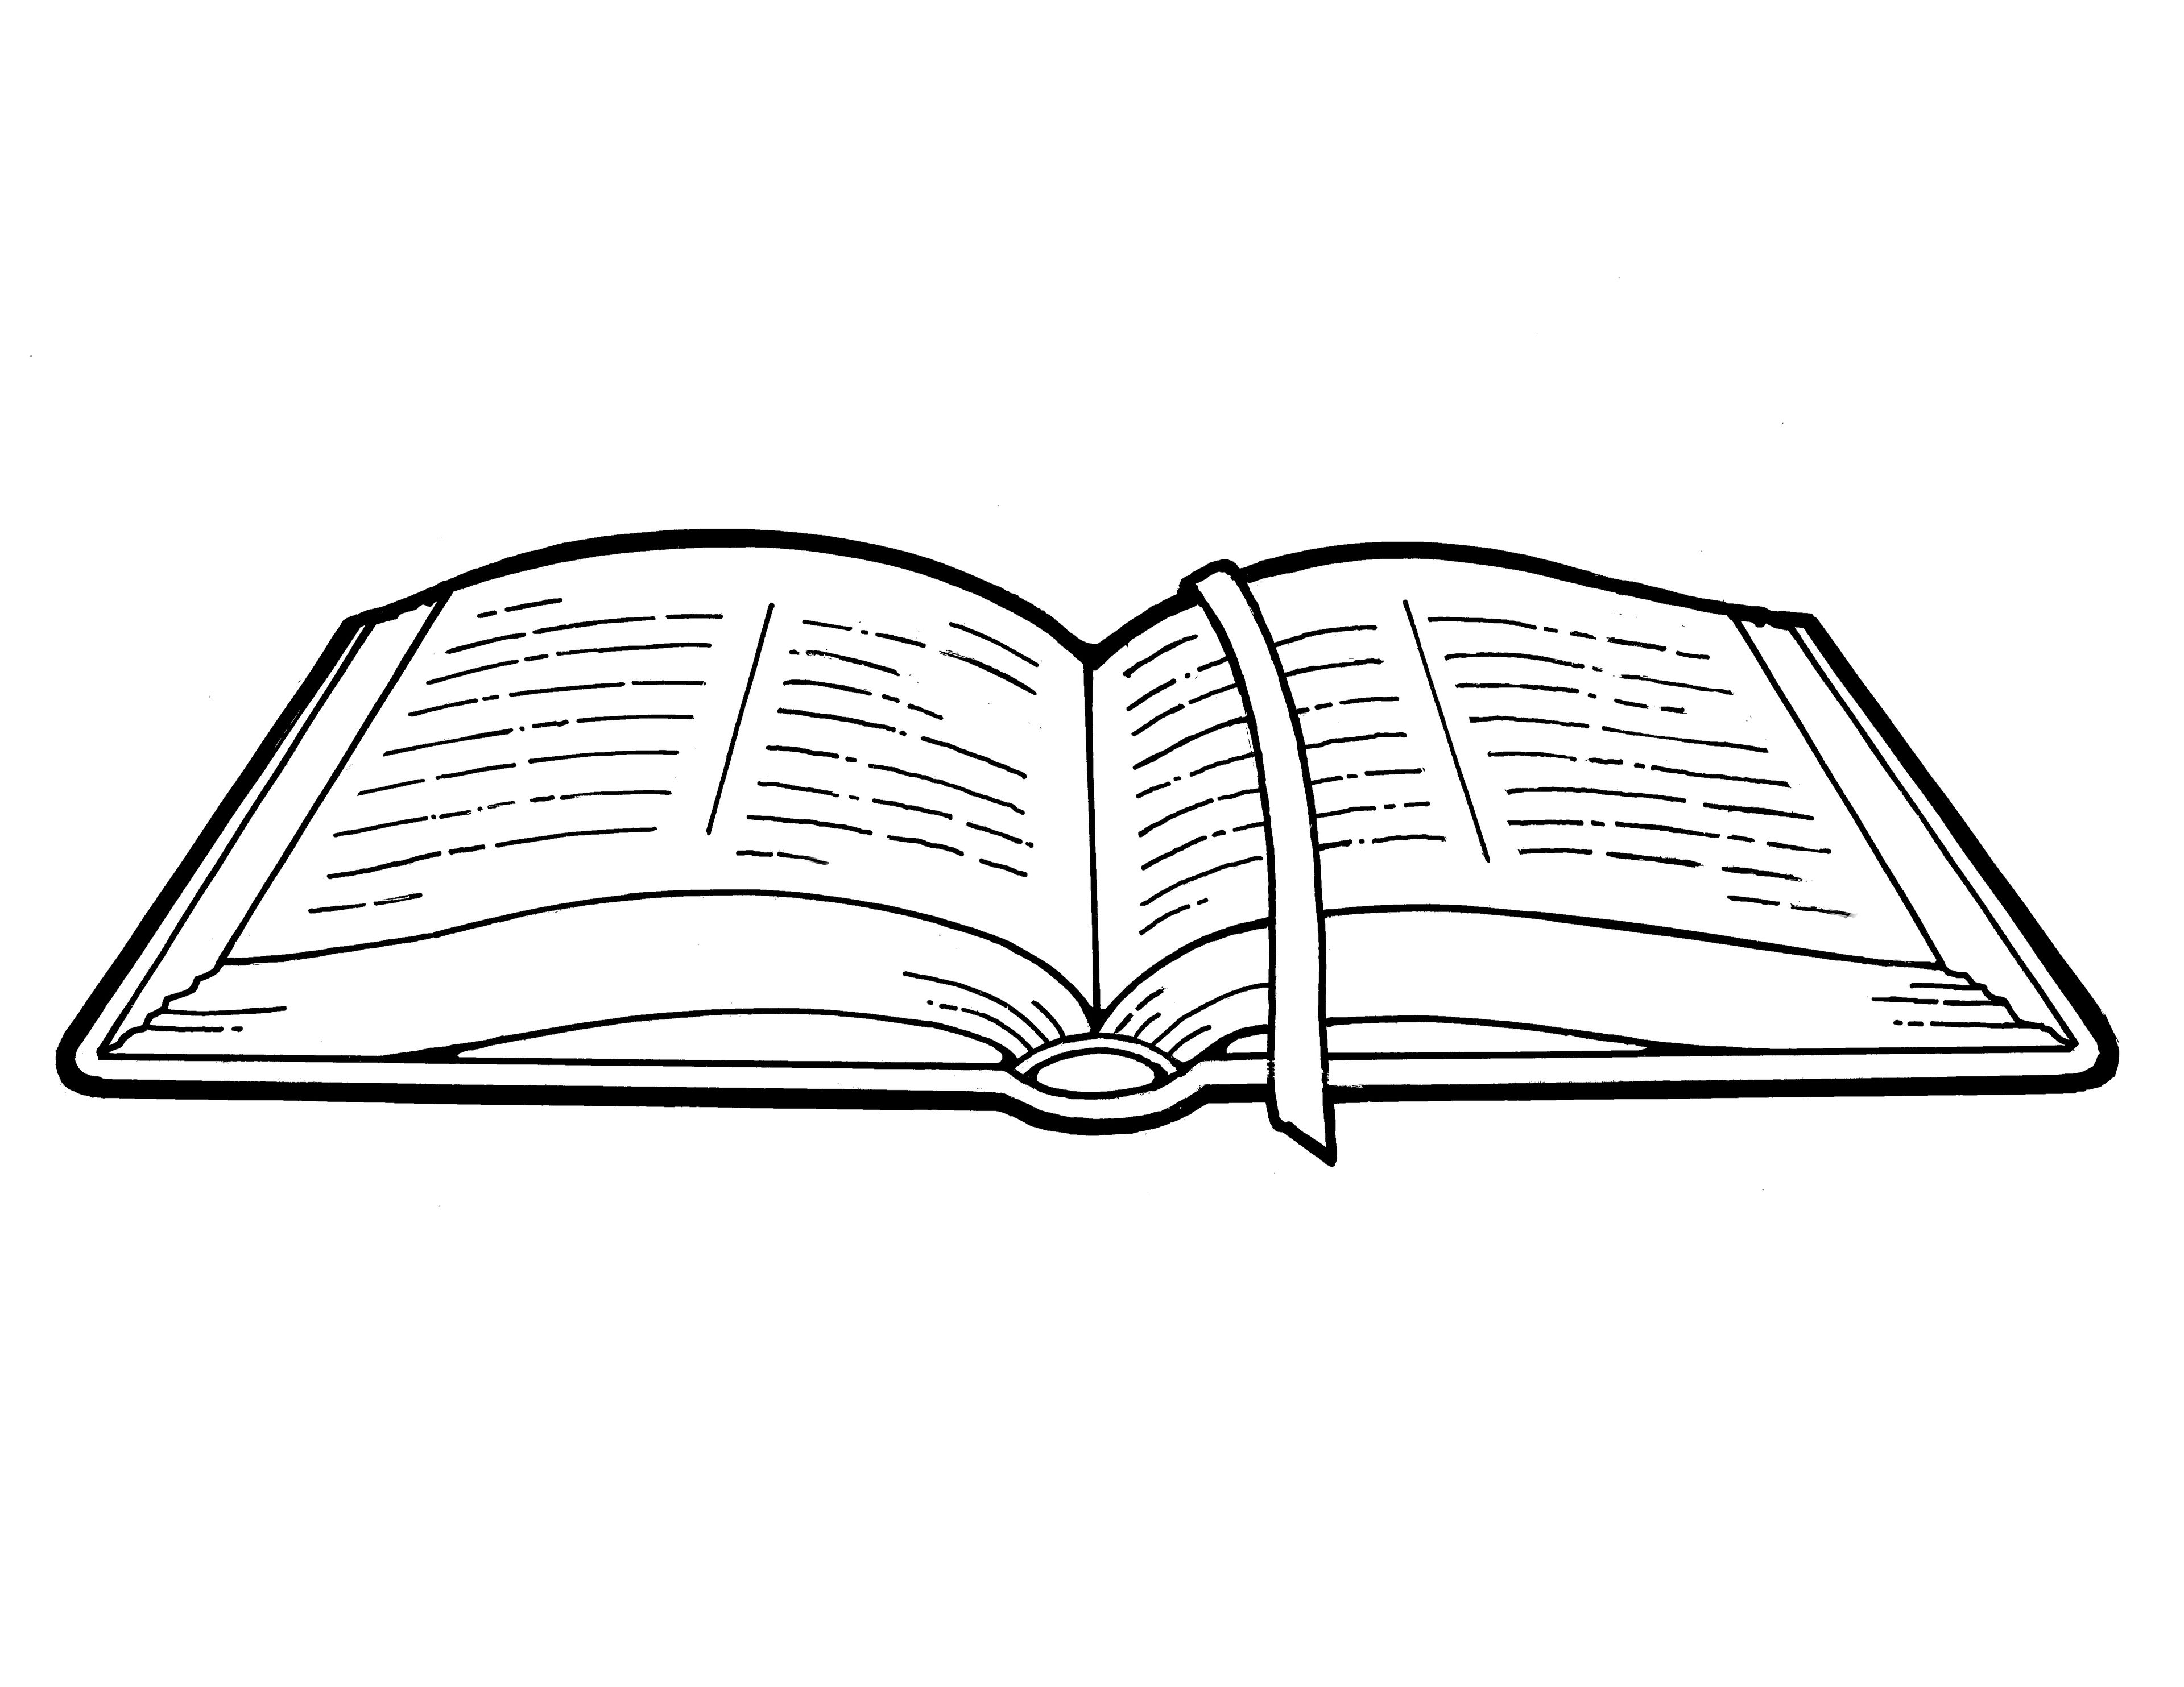 An illustration of a book of scripture lying open, with a ribbon bookmark.